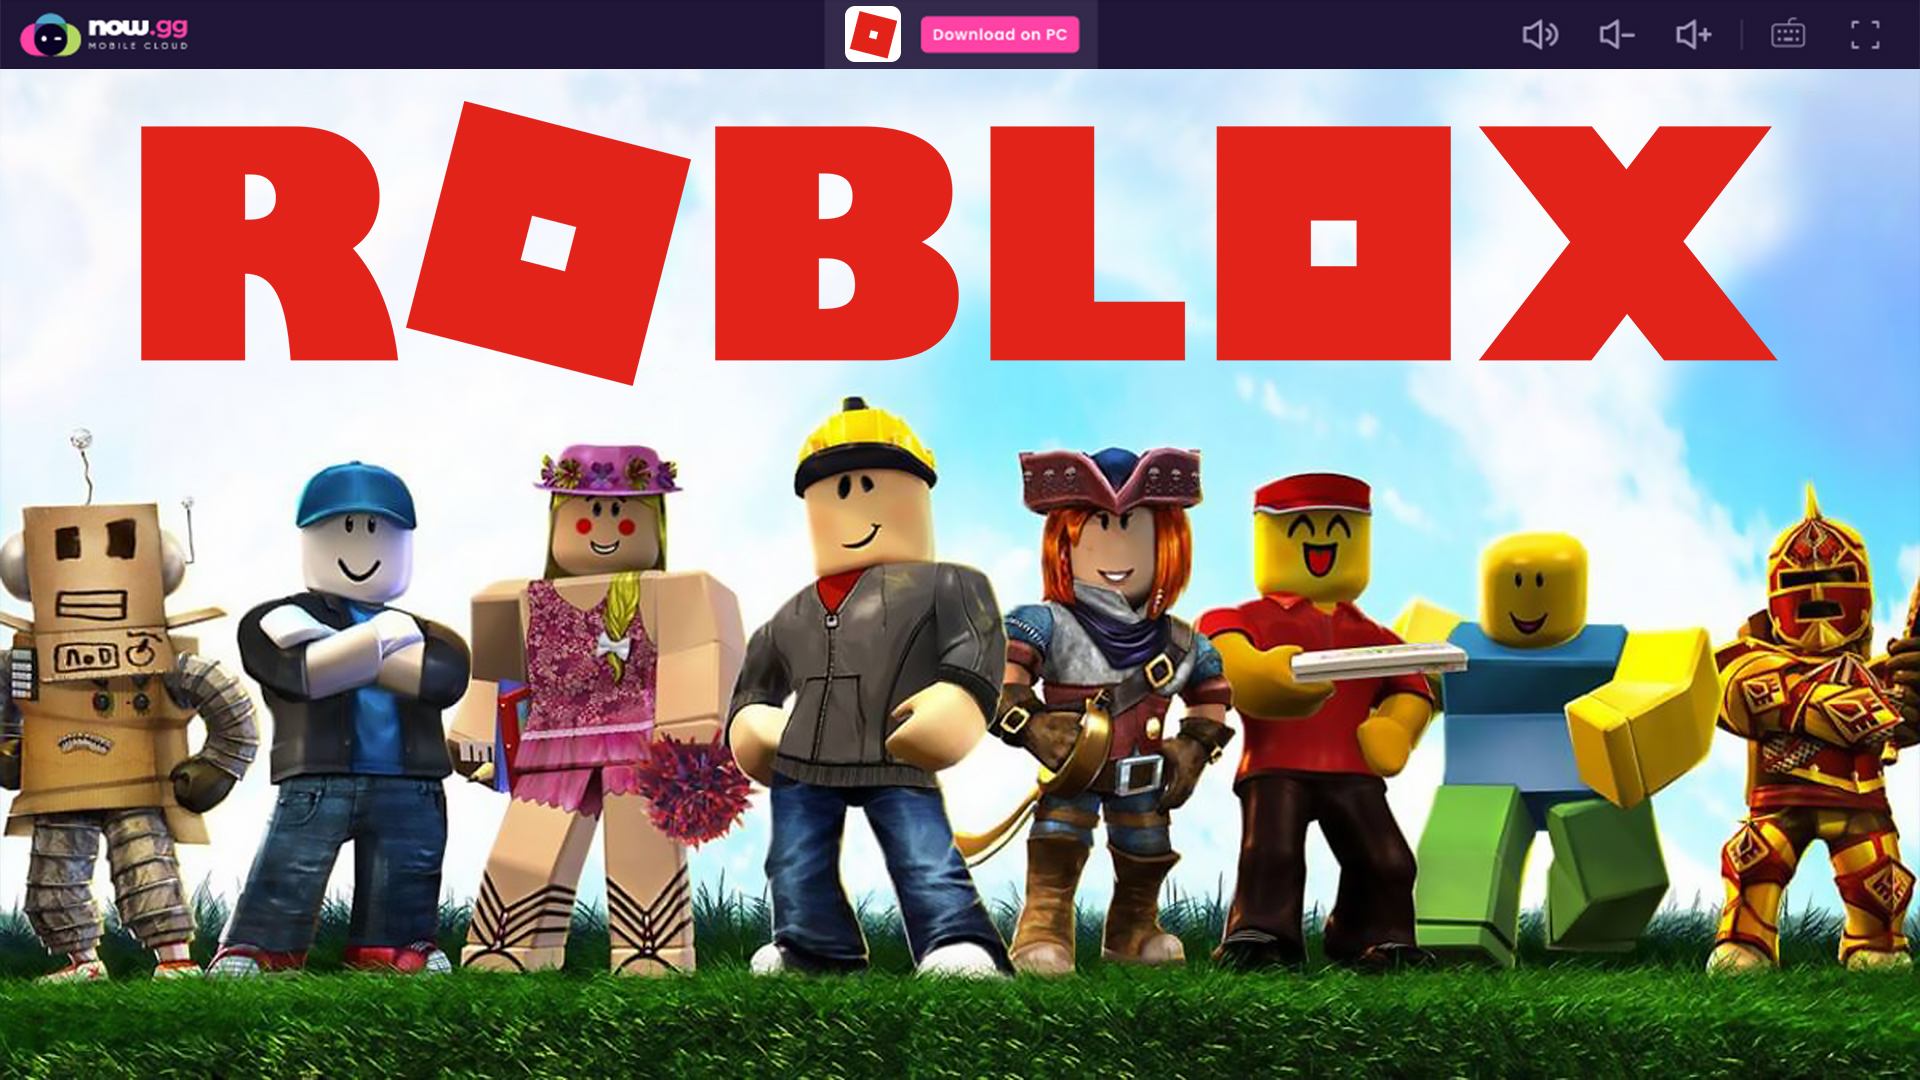 Roblox logo overlays diverse avatars on a grassy landscape with a clear sky.